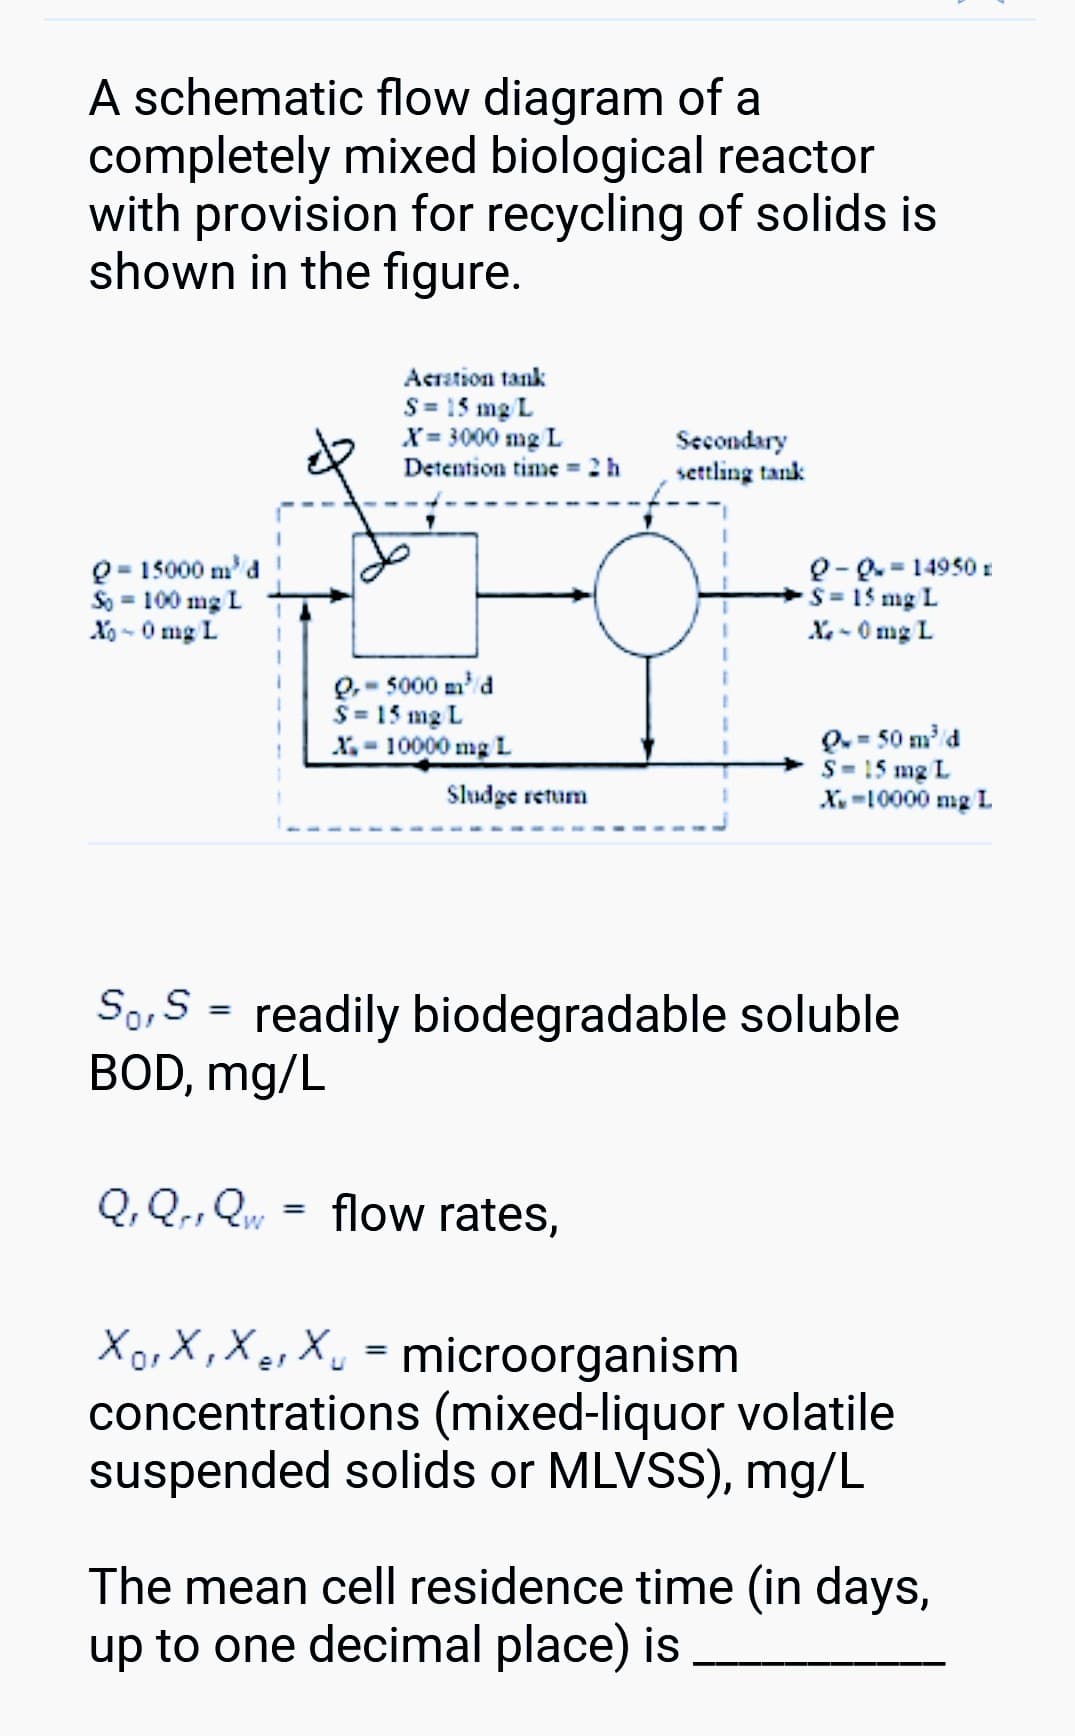 A schematic flow diagram of a
completely mixed biological reactor
with provision for recycling of solids is
shown in the figure.
Q-15000 m³ d
So = 100 mg L
X-0 mg L
1
Acration tank
S = 15 mg L
X = 3000 mg L
Detention time = 2h
Q,- 5000 m³/d
S = 15 mg L
X-10000 mg L
Sludge retum
Secondary
settling tank
Q, QrQw = flow rates,
Q-Q=14950
S-15 mg L
X-0 mg L
Q-50 m³/d
S = 15 mg L
X-10000 mg L
So, S = readily biodegradable soluble
BOD, mg/L
Xo, X, X₂, X = microorganism
concentrations (mixed-liquor volatile
suspended solids or MLVSS), mg/L
The mean cell residence time (in days,
up to one decimal place) is